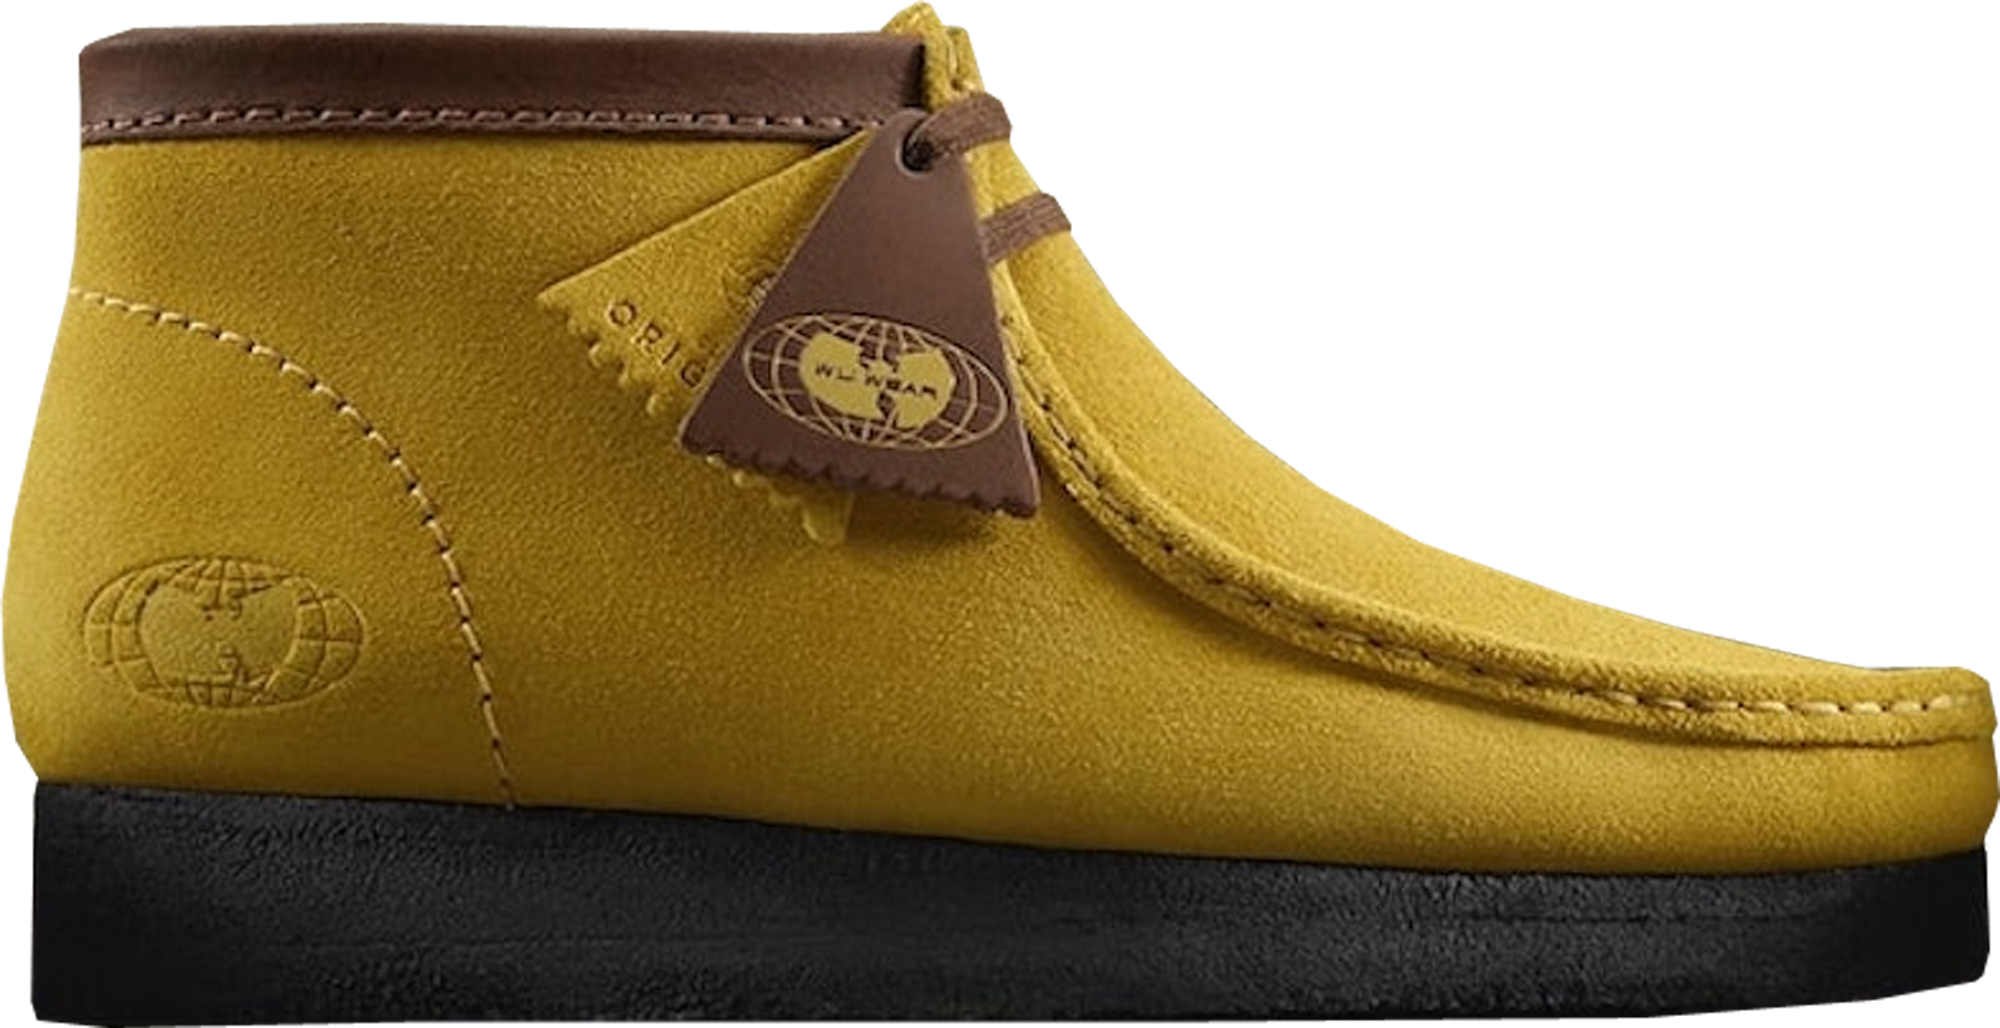 Clarks Wallabees Wu-Tang 36 Chambers 